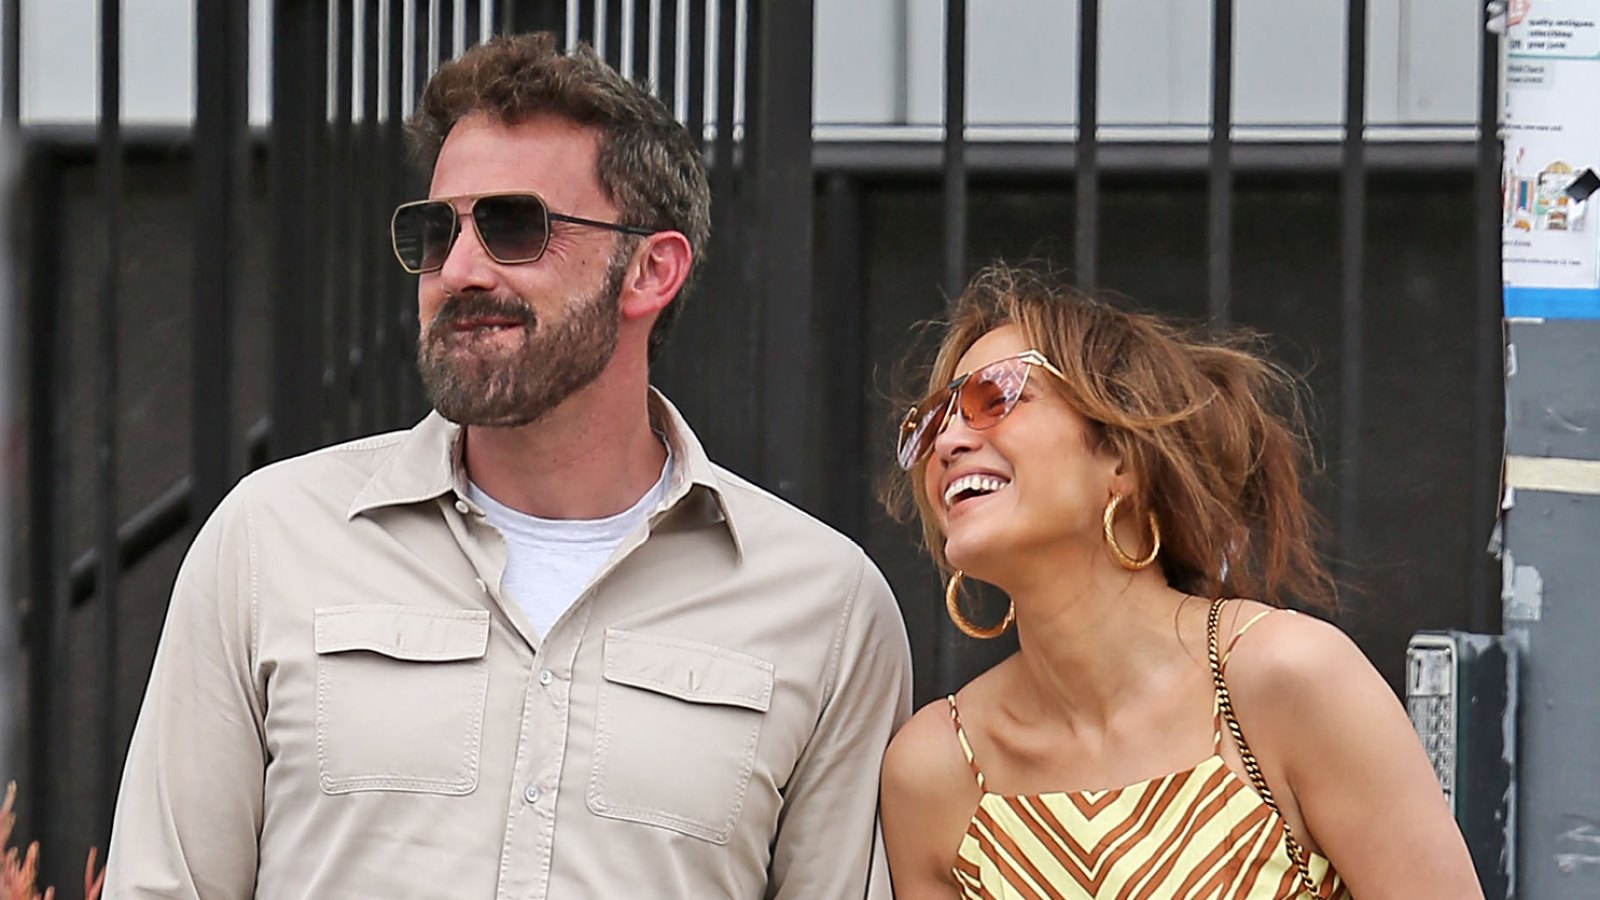 Jennifer Lopez and Ben Affleck Share a Sweet Kiss While on Los Angeles Shopping Date: Photo